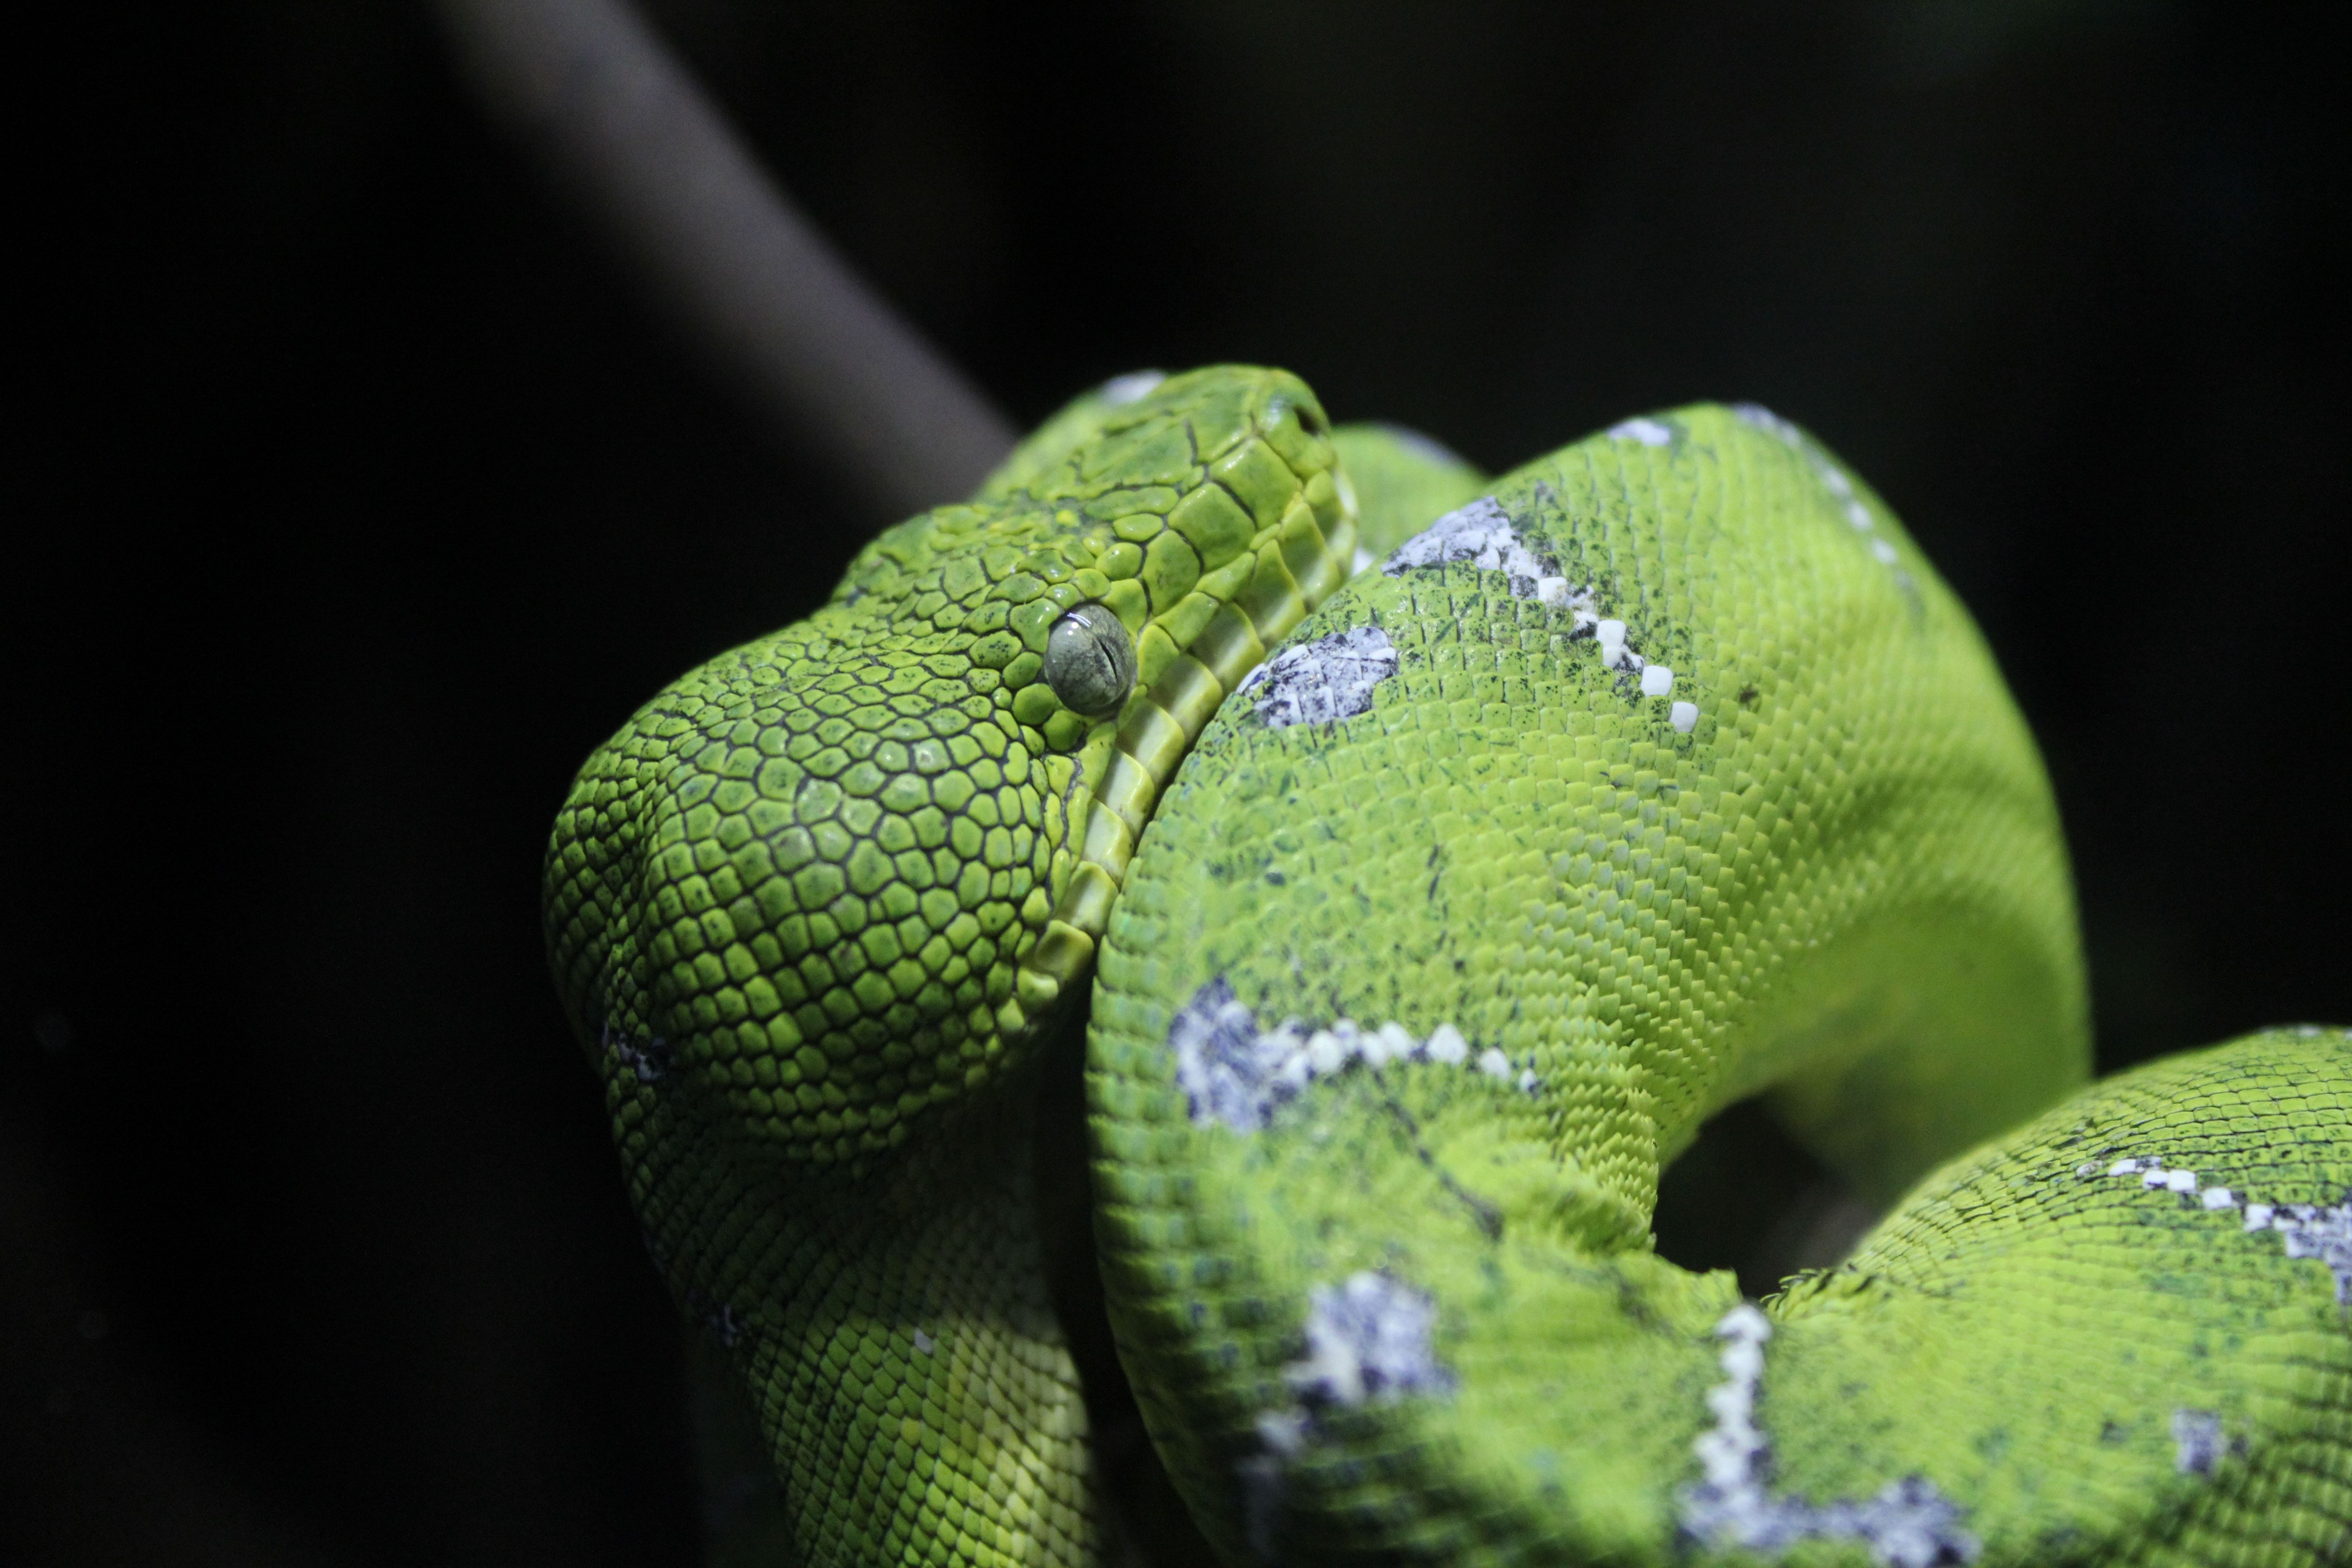 green and gray striped snake free image